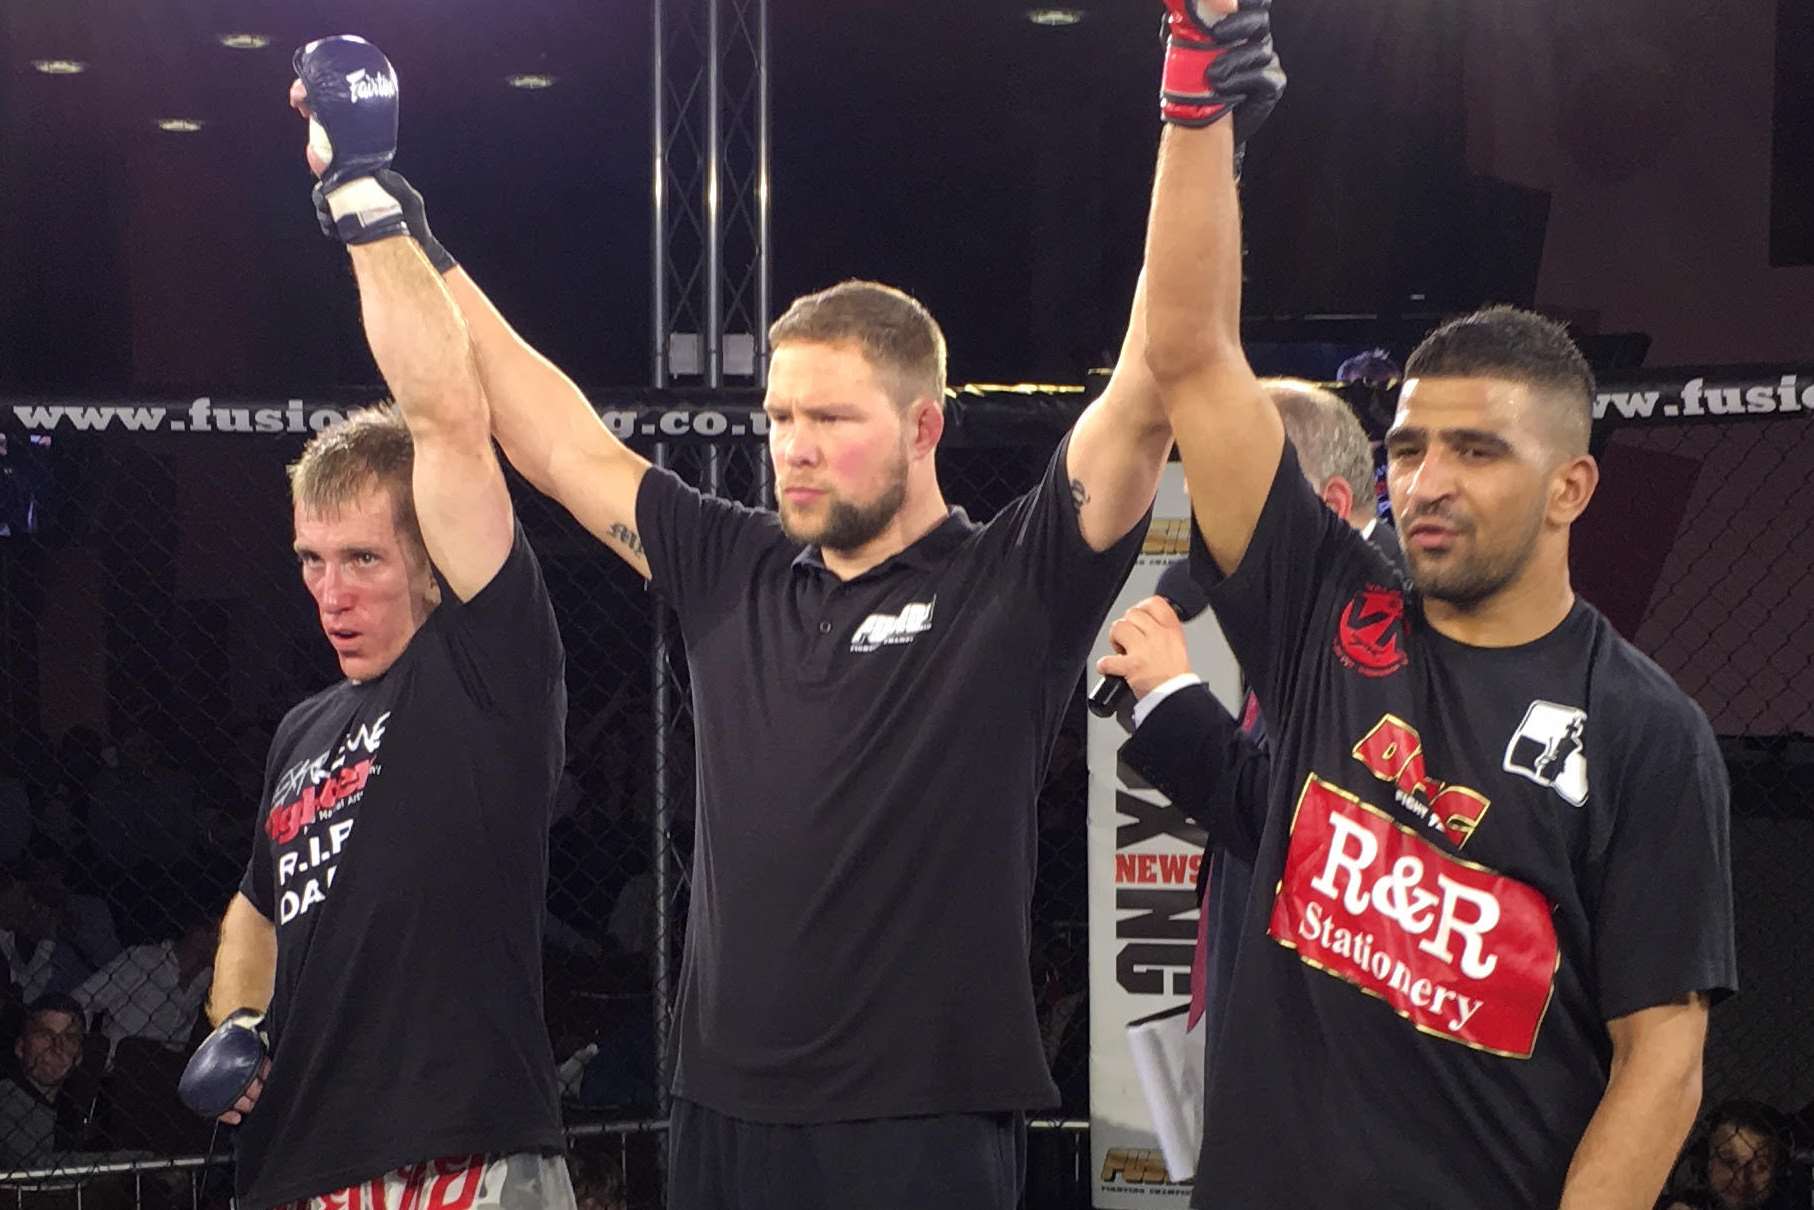 Gurd Shergill (right) had a draw on his debut fight